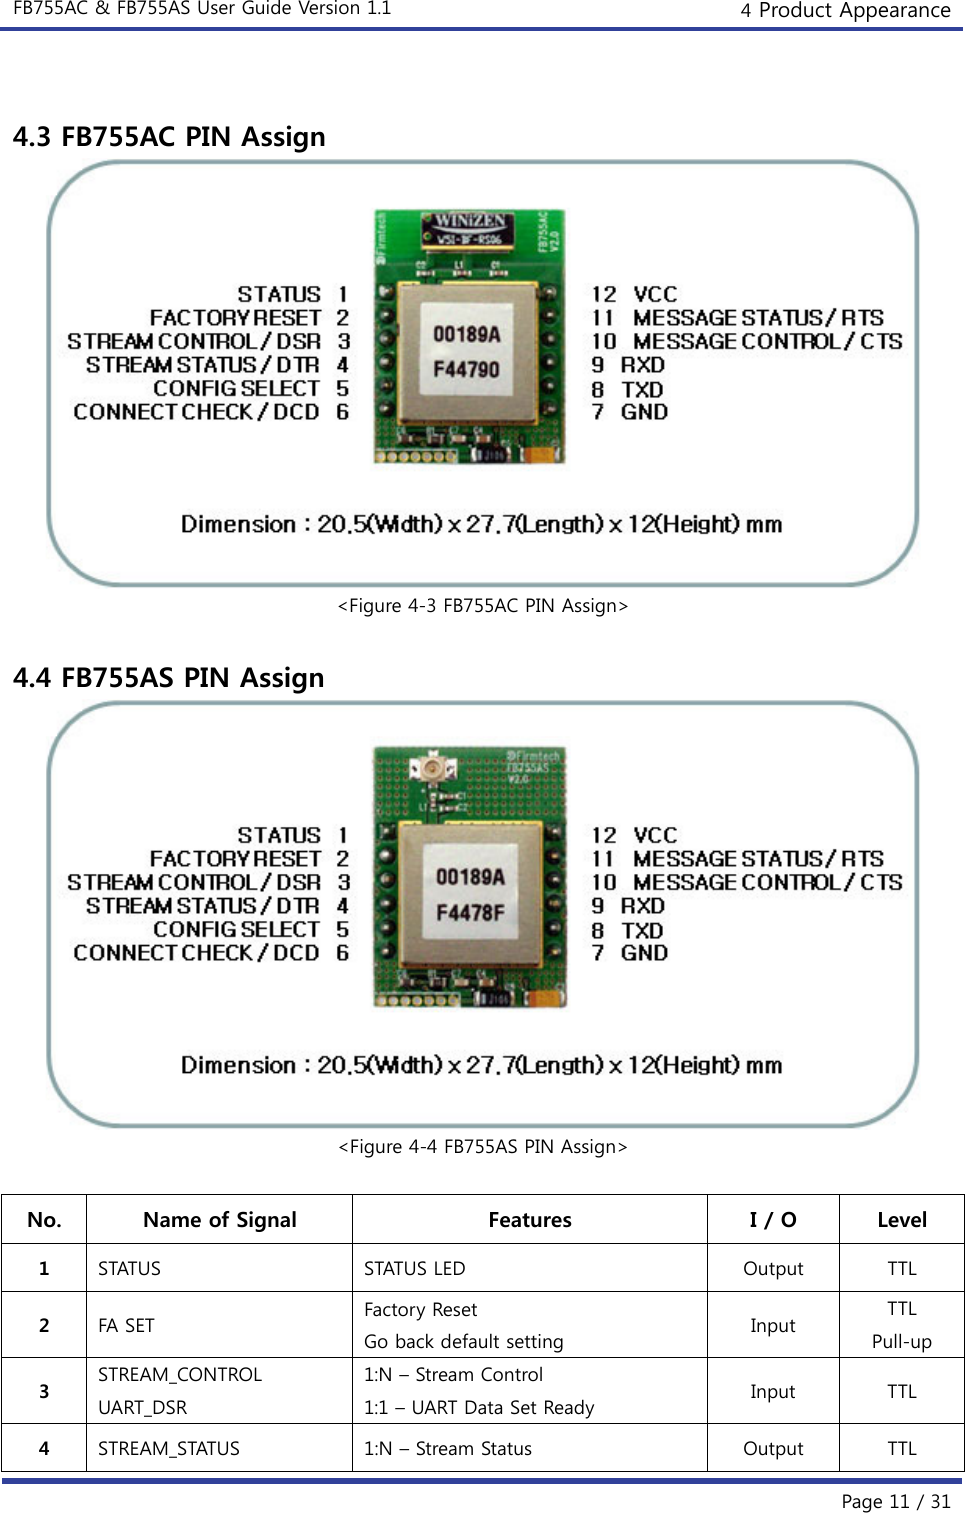 FB755AC &amp; FB755AS User Guide Version 1.1  4 Product Appearance  Page 11 / 31  4.3 FB755AC PIN Assign  &lt;Figure 4-3 FB755AC PIN Assign&gt;  4.4 FB755AS PIN Assign  &lt;Figure 4-4 FB755AS PIN Assign&gt;  No.  Name of Signal  Features  I / O  Level 1  STATUS  STATUS LED  Output  TTL 2  FA SET  Factory Reset Go back default setting  Input  TTL Pull-up 3  STREAM_CONTROL UART_DSR 1:N – Stream Control 1:1 – UART Data Set Ready  Input  TTL 4  STREAM_STATUS  1:N – Stream Status  Output  TTL 